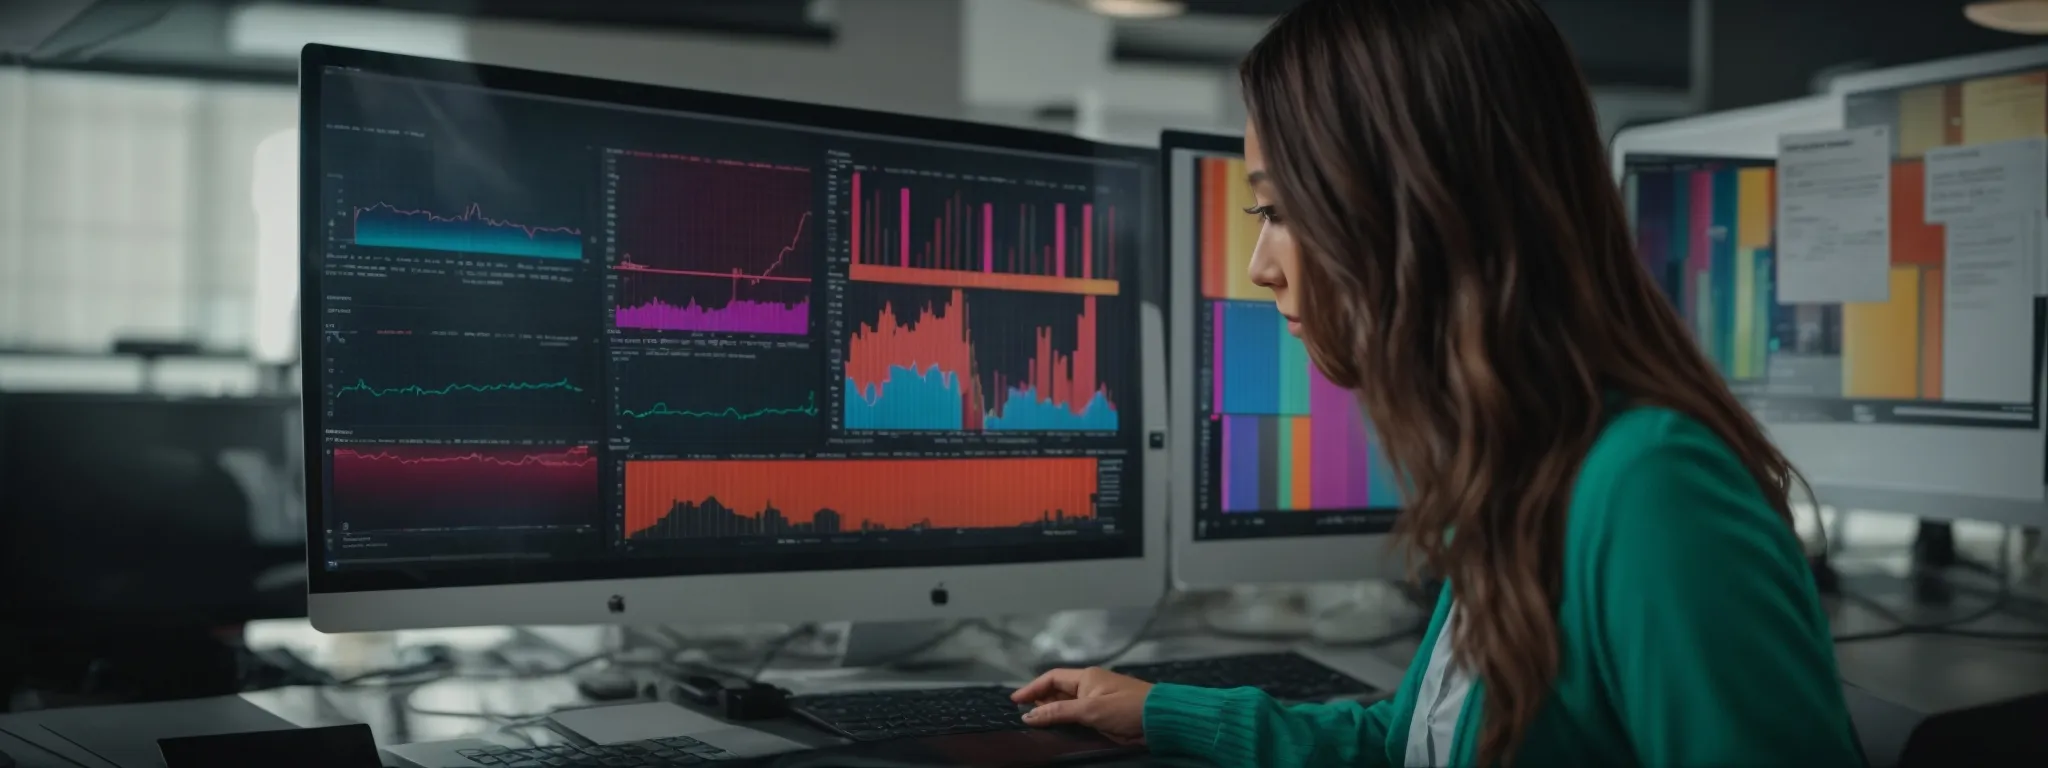 a marketer analyzes a colorful keyword data visualization on a computer screen in a bright, modern office setting.